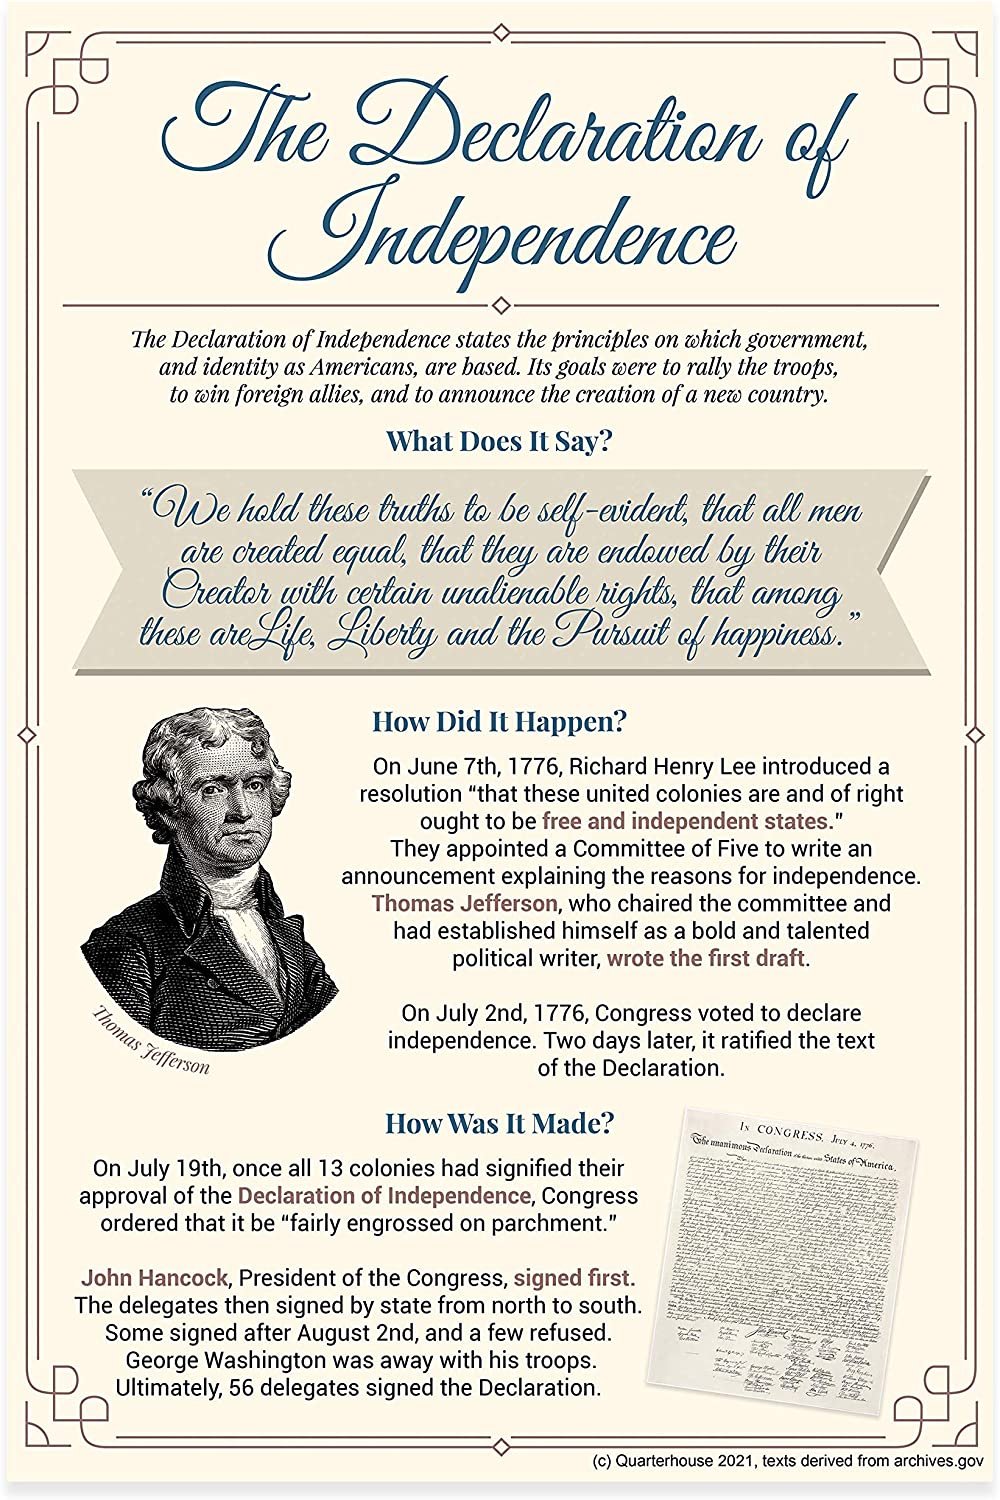 Quarterhouse Important Documents From US History Poster Set, Social Studies Classroom Learning Materials for K-12 Students and Teachers, Set of 4, 12 x 18 Inches, Extra Durable